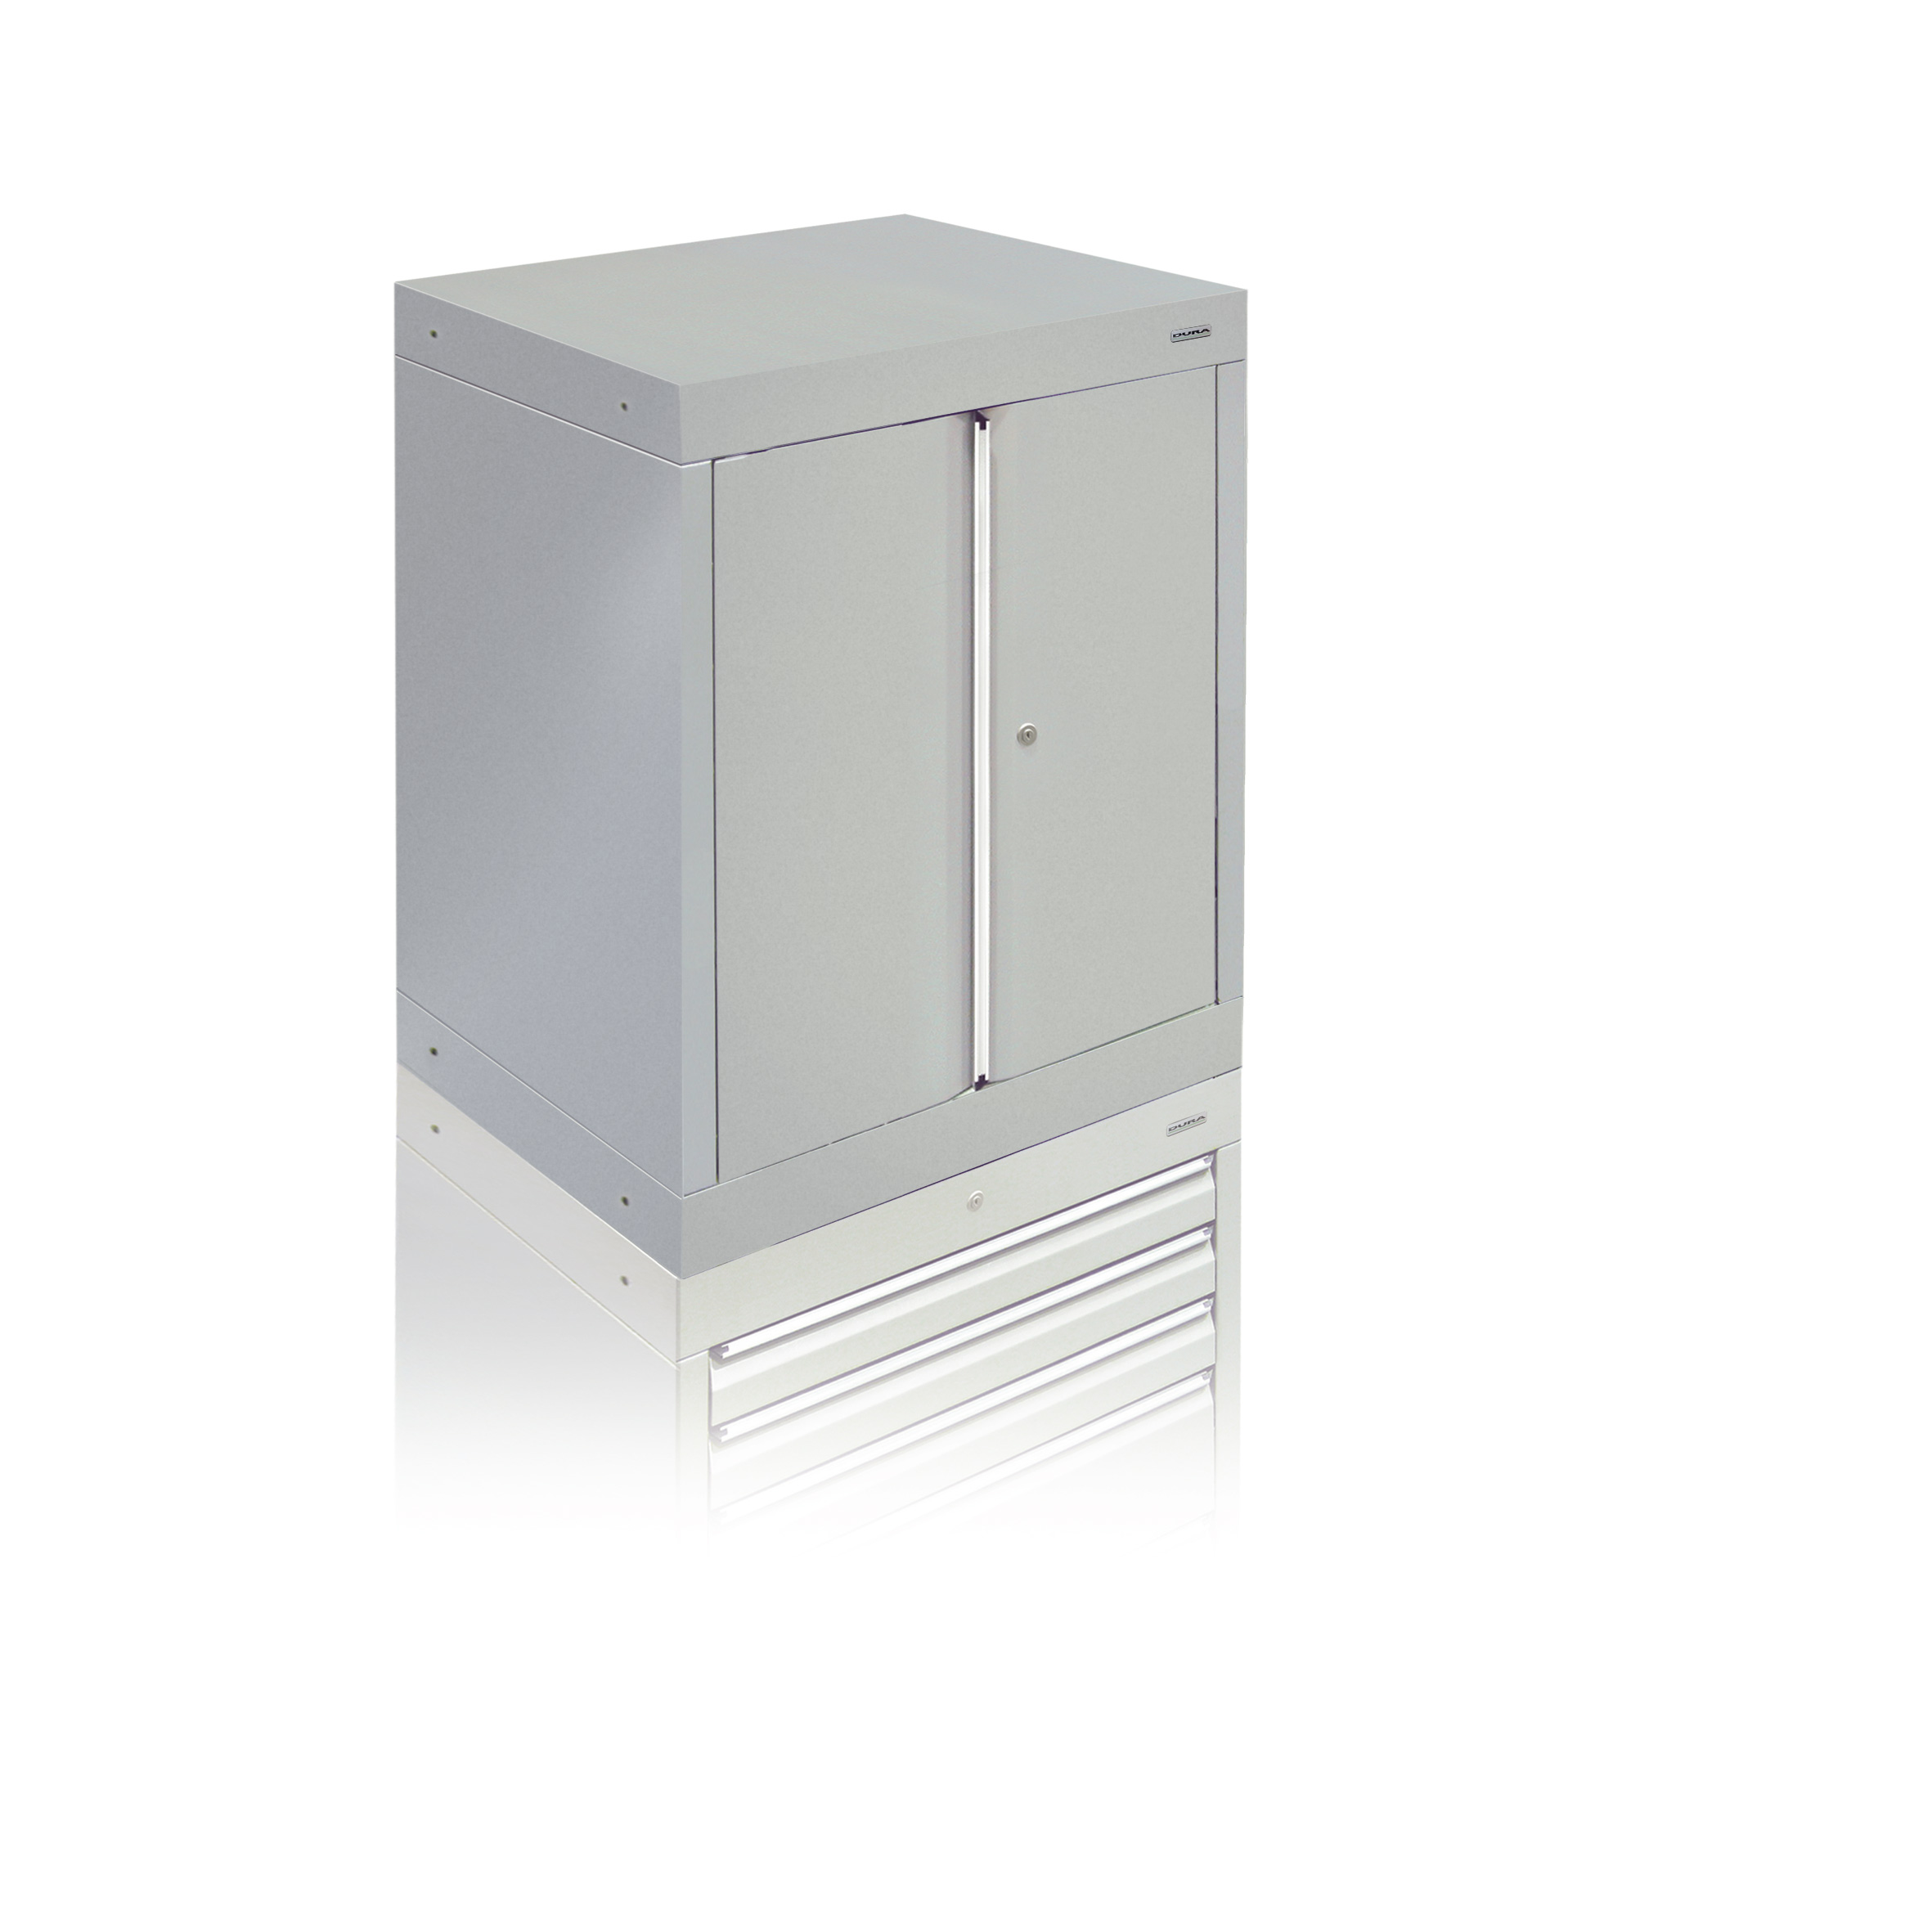 Tall wall cabinet with double doors (900mm)